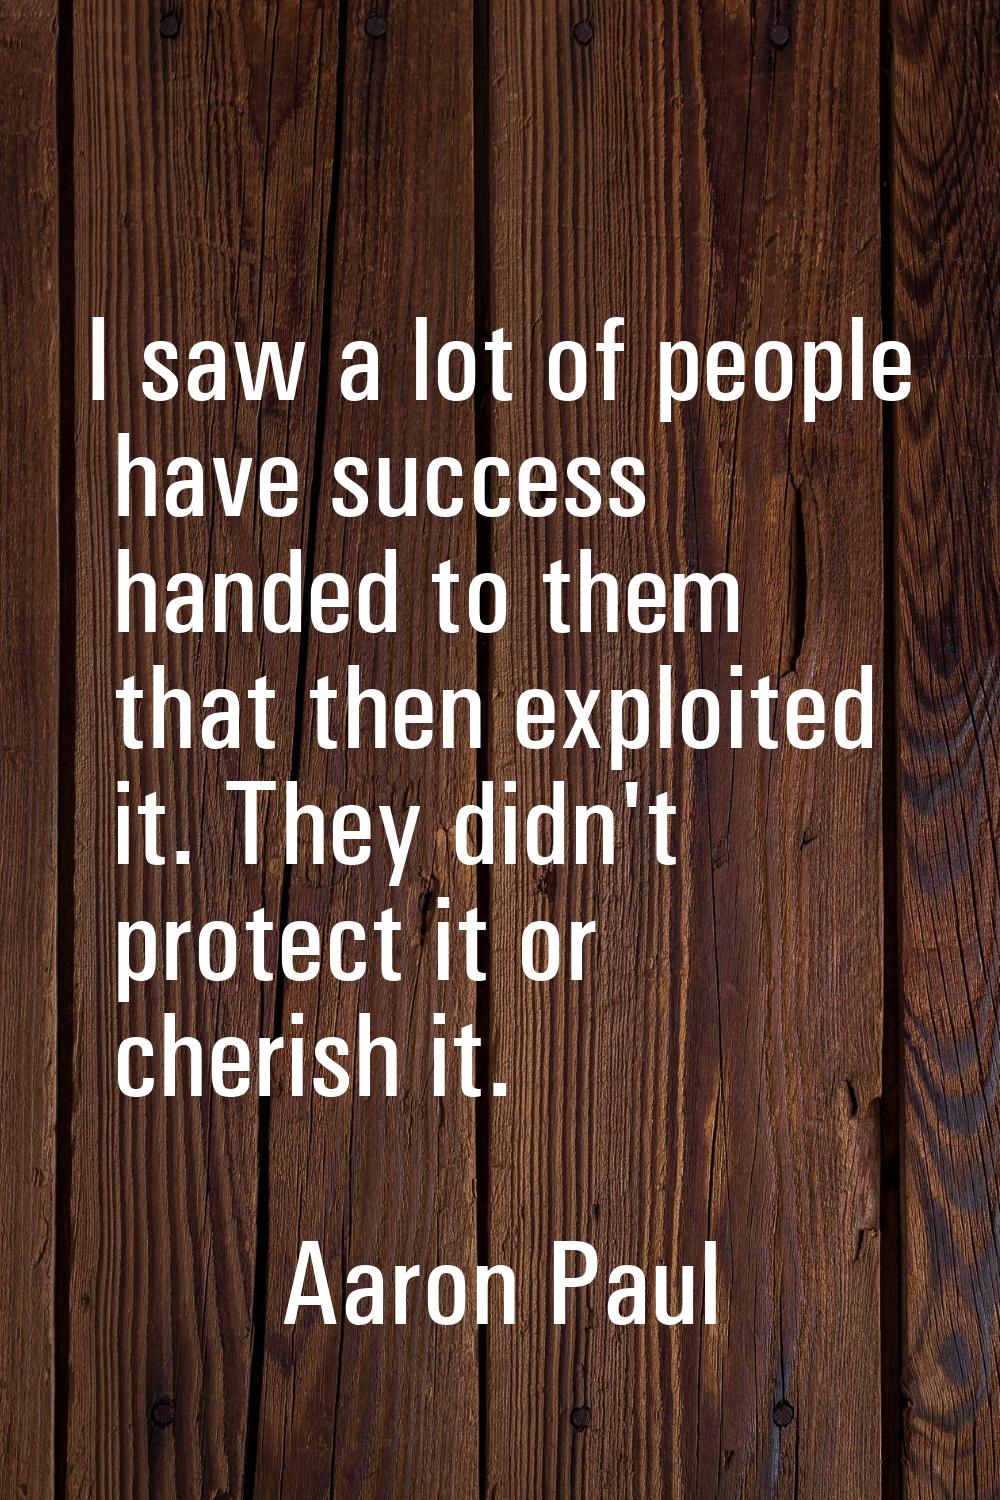 I saw a lot of people have success handed to them that then exploited it. They didn't protect it or